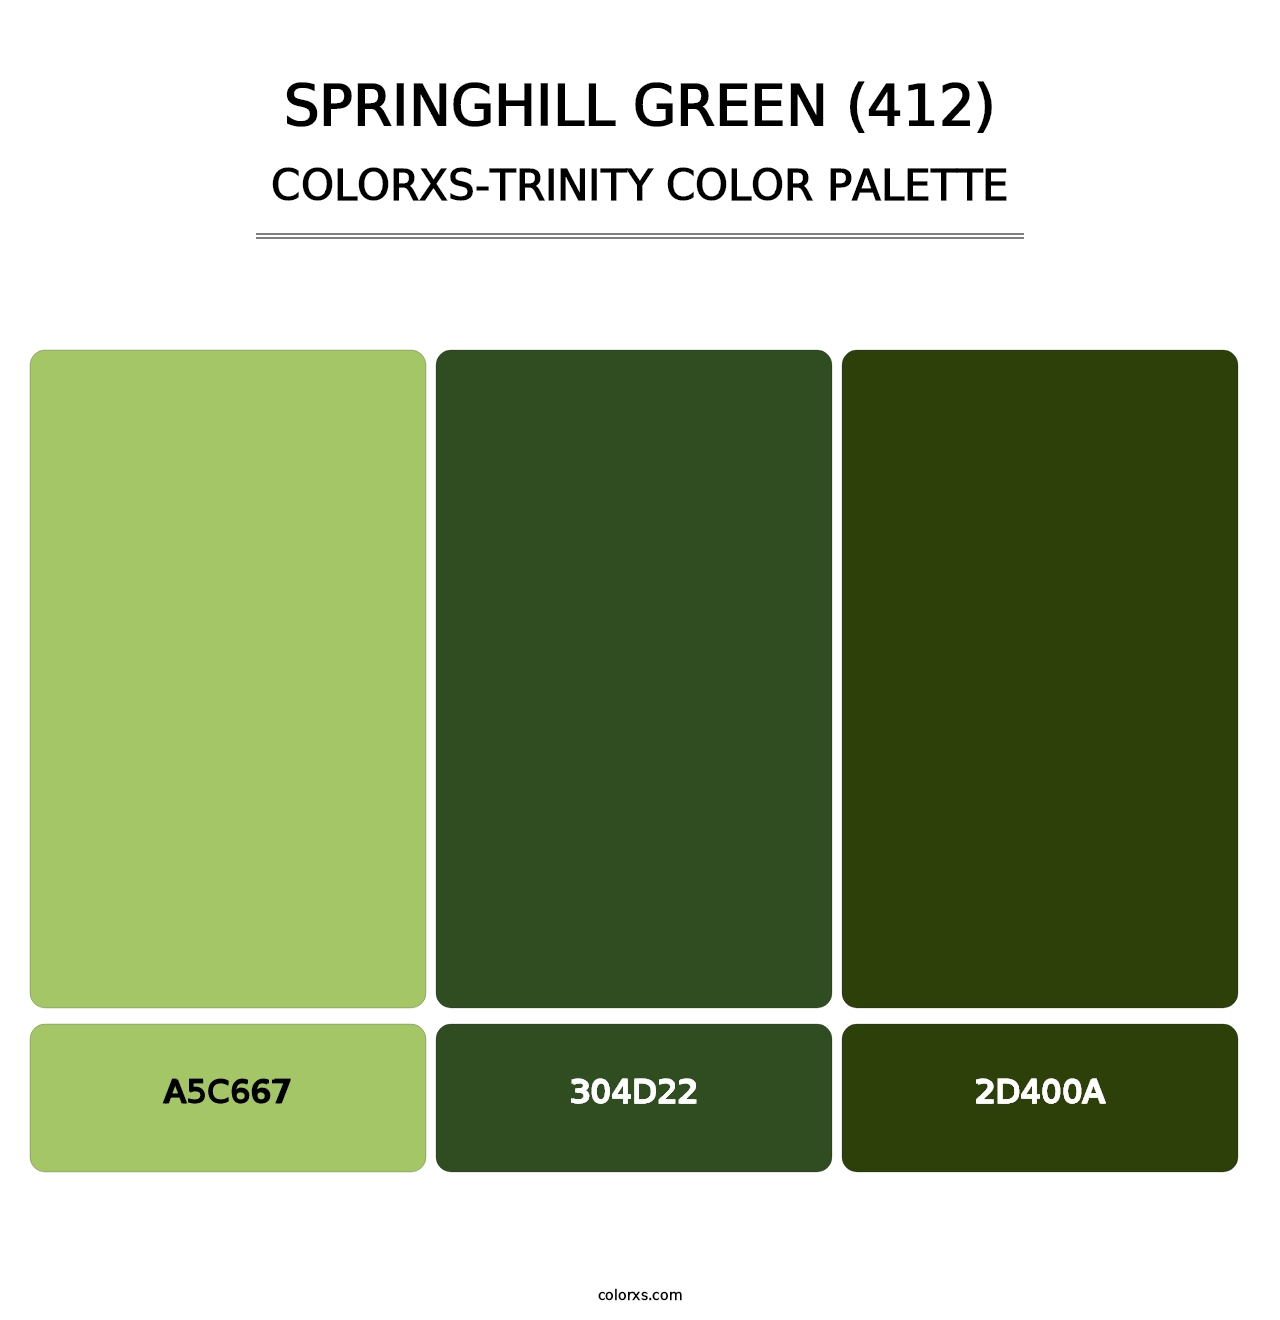 Springhill Green (412) - Colorxs Trinity Palette